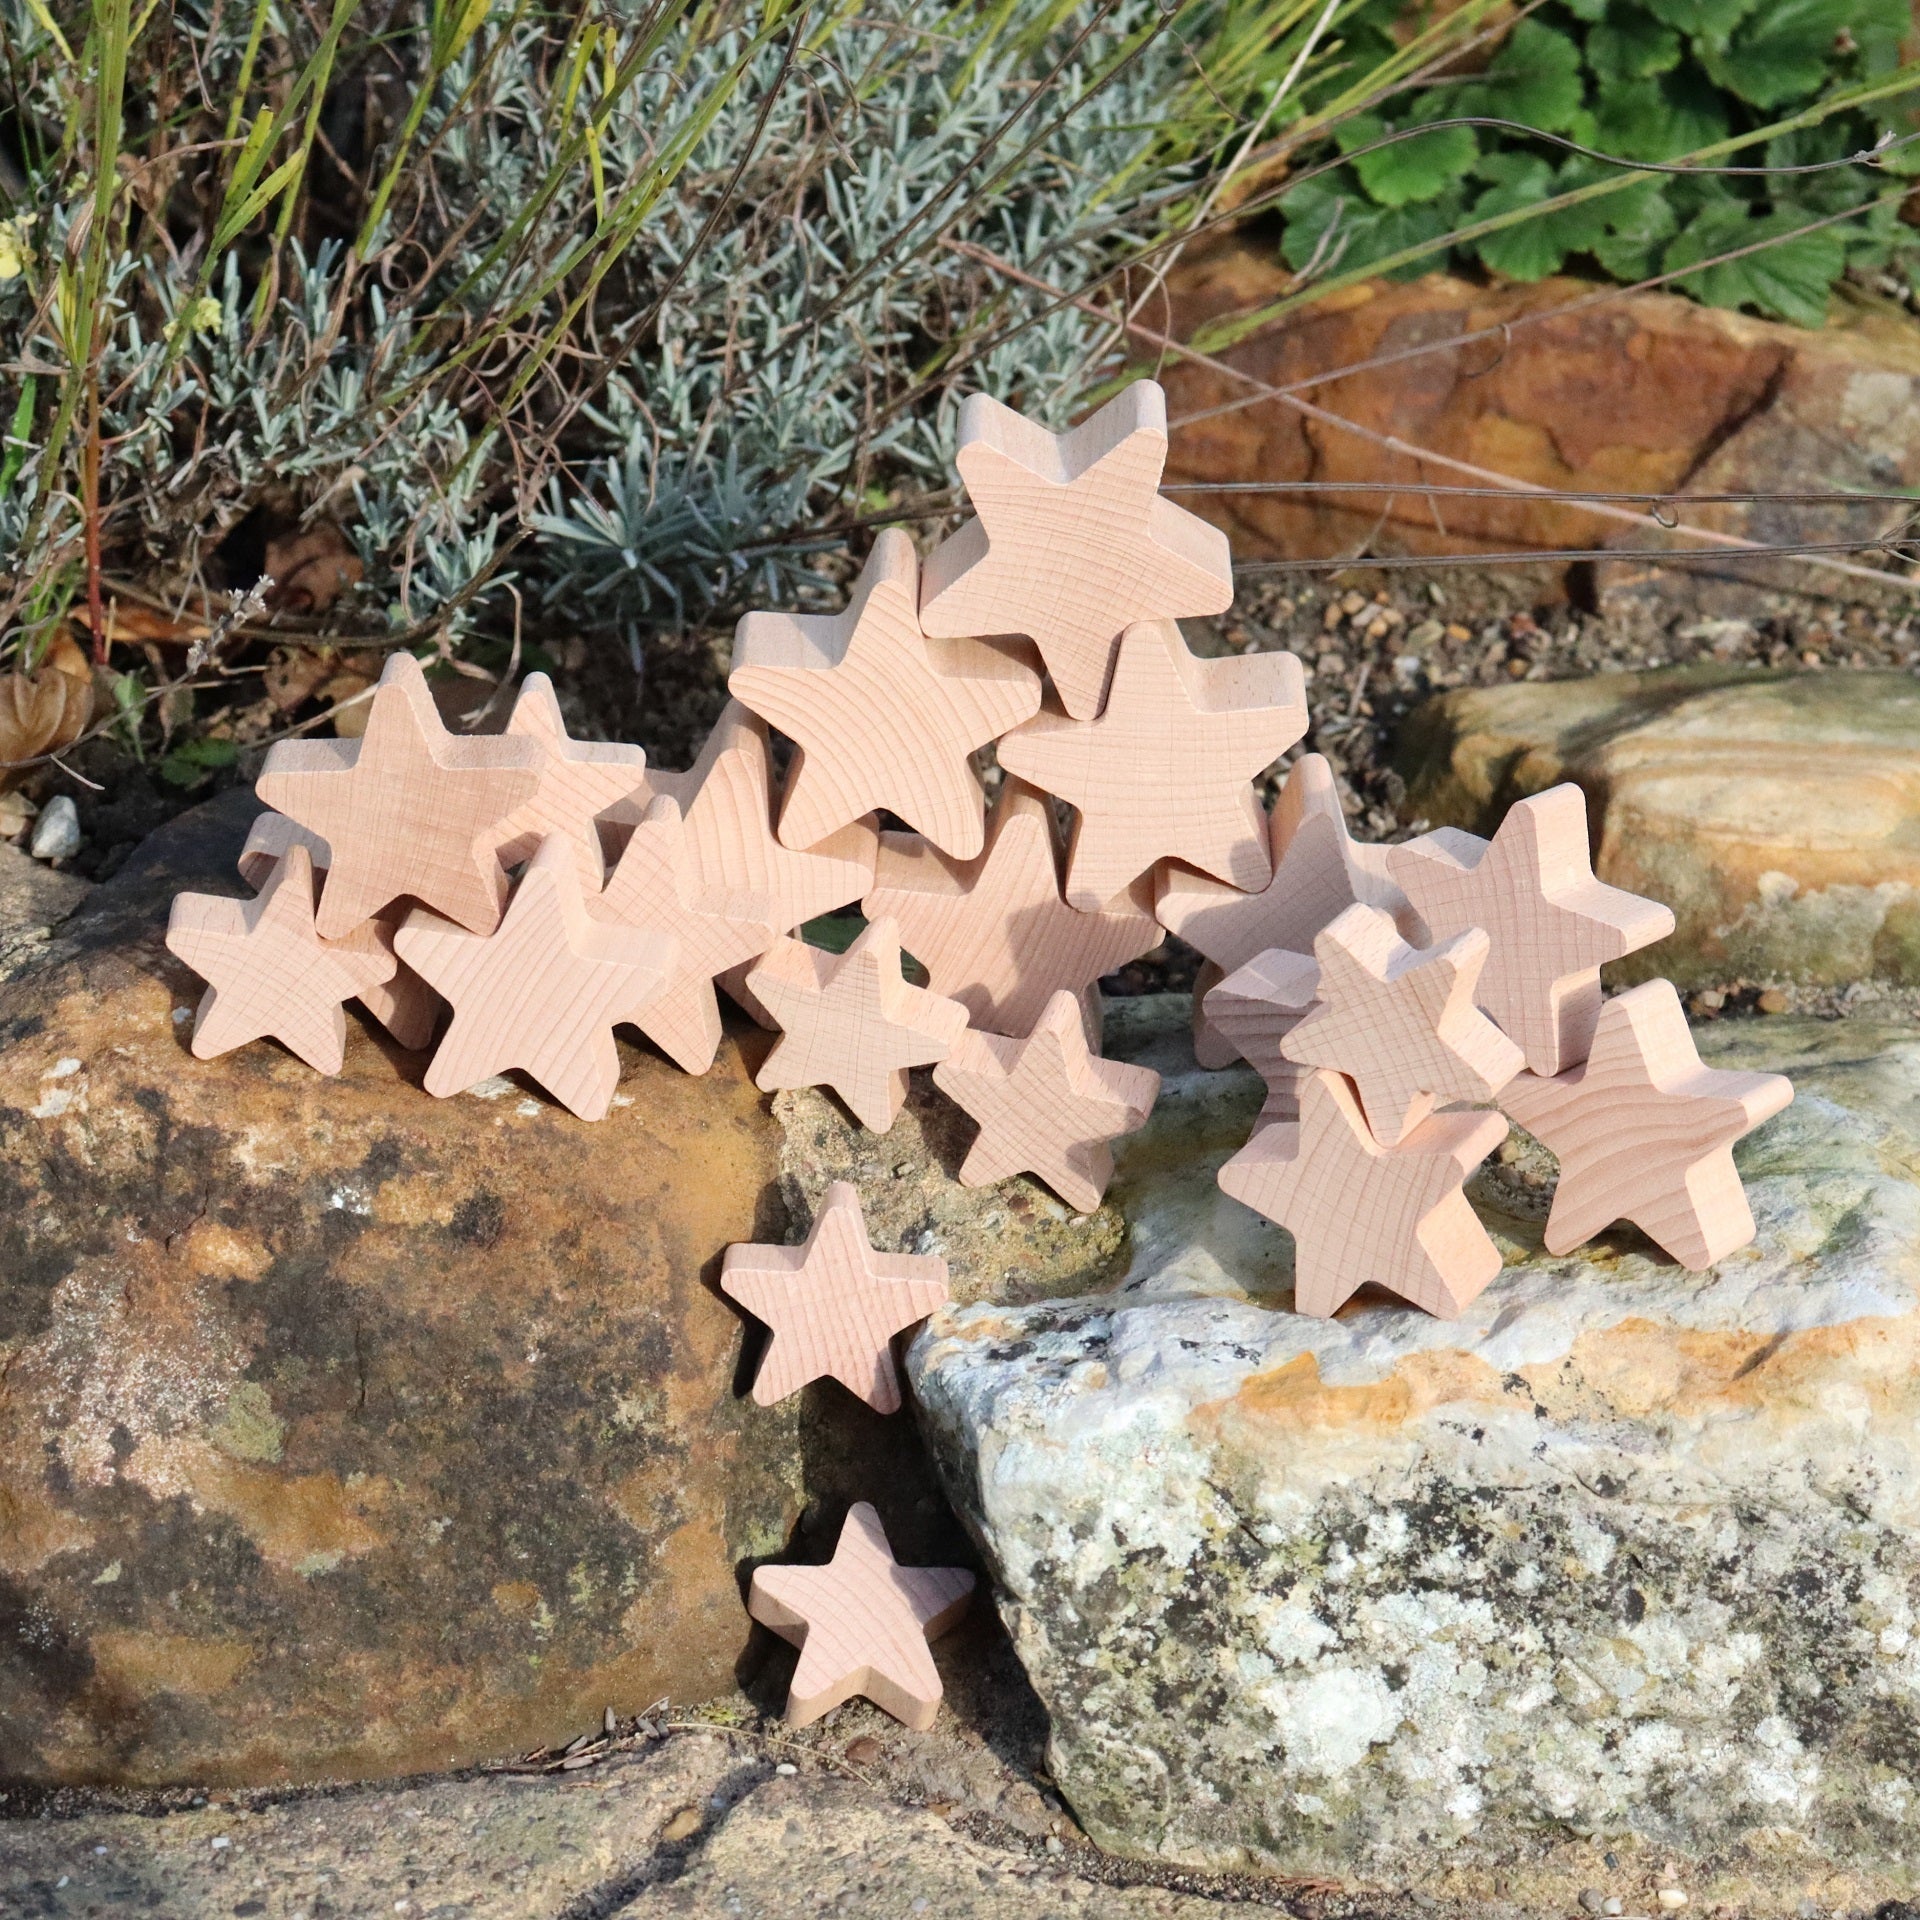 Natural Wooden Stars, Our TickiT® Natural Wooden Stars are made from beautiful smooth solid beechwood with a natural woodgrain finish. An inspiring addition to our heuristic play range. Chunky and tactile, they are easy for small hands to manipulate, stack, count, sequence and explore. These simple and curious natural smooth wooden stars will spark your child's imagination and encourage them to explore ways to incorporate them into imaginative play and learn about the world around them. Quite simply, they s